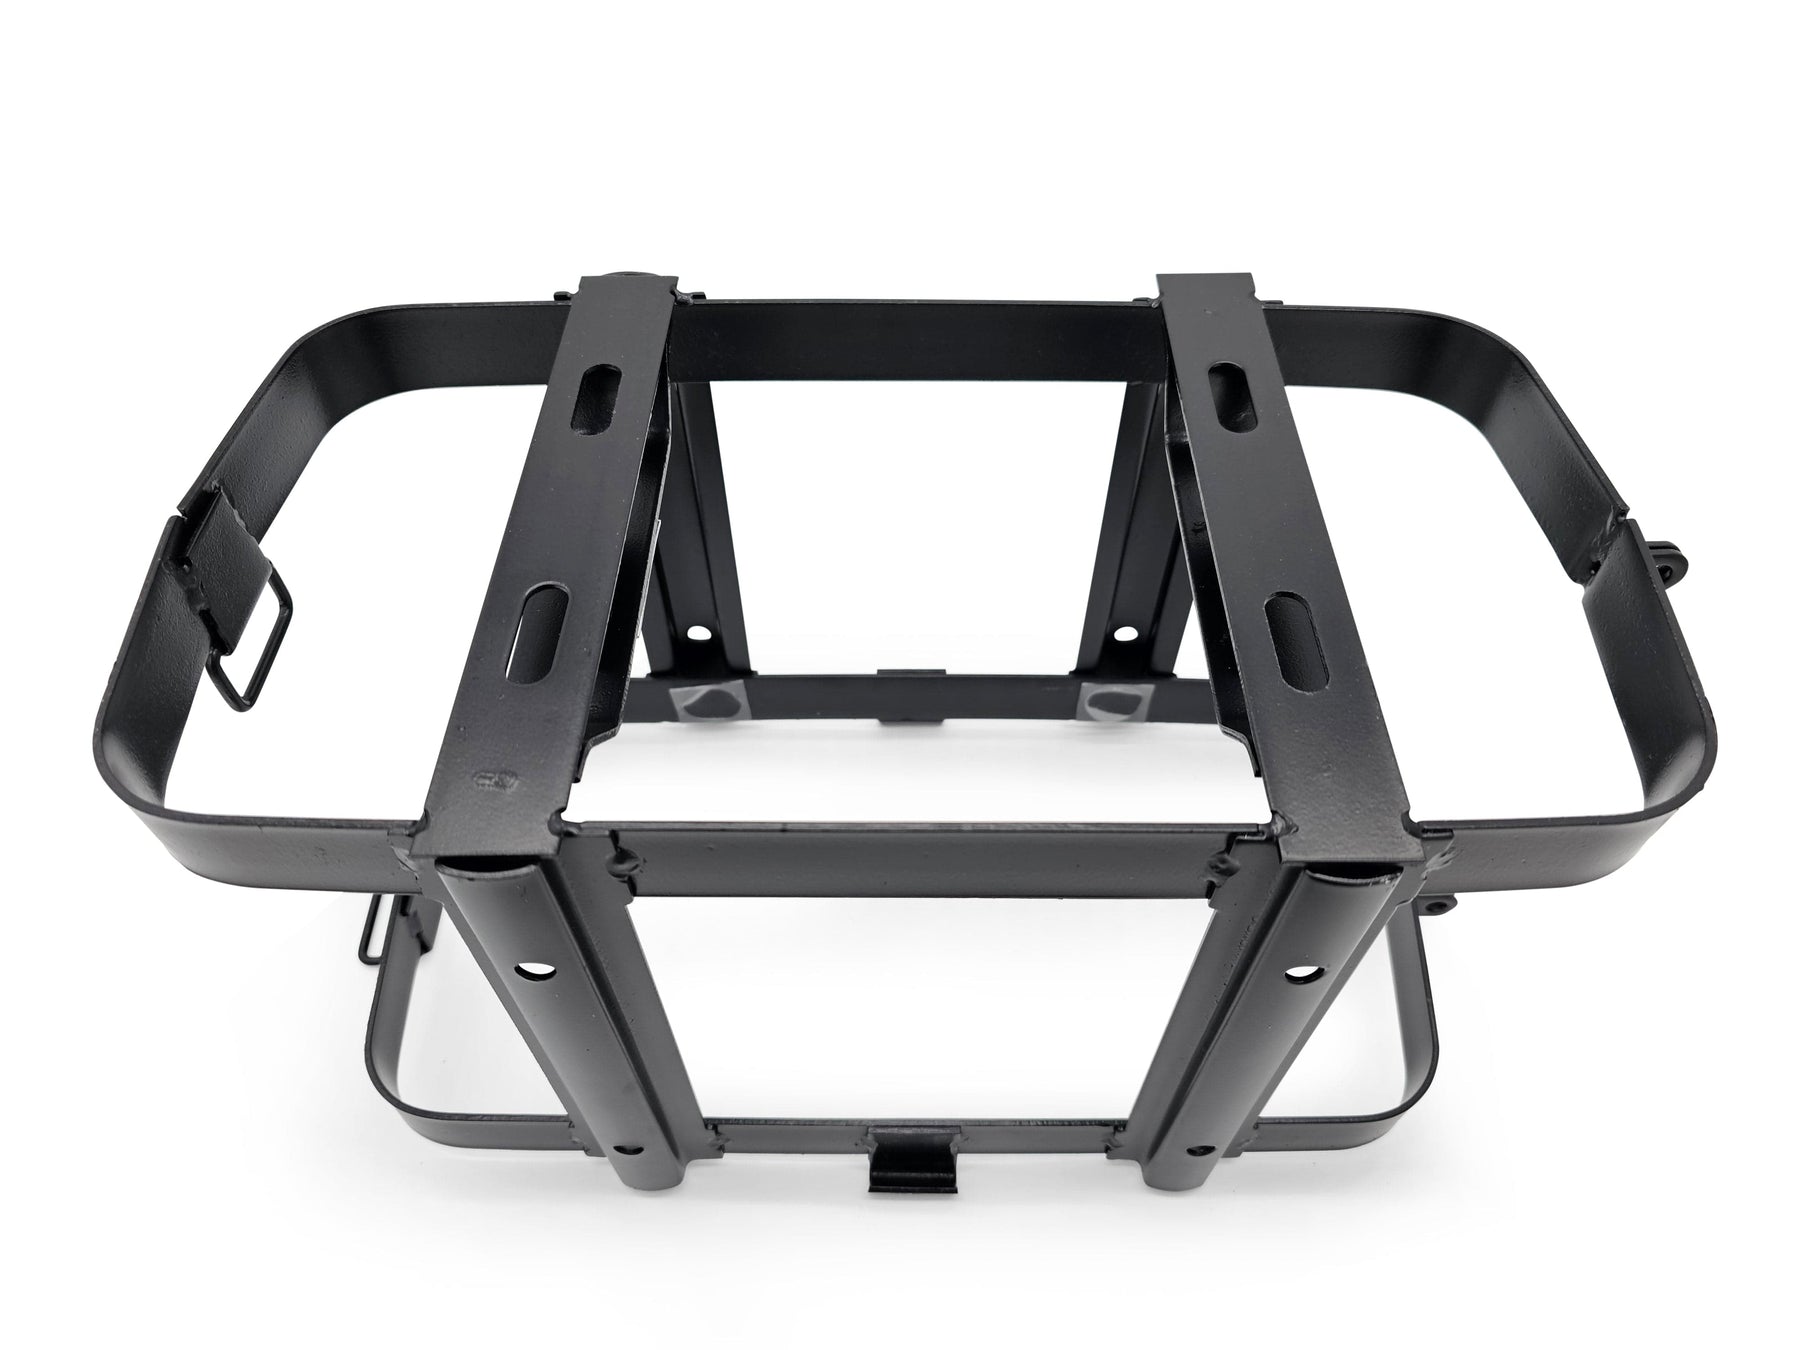 2.5 or 5 Gallon Jerry Can Bracket – GTFOverland